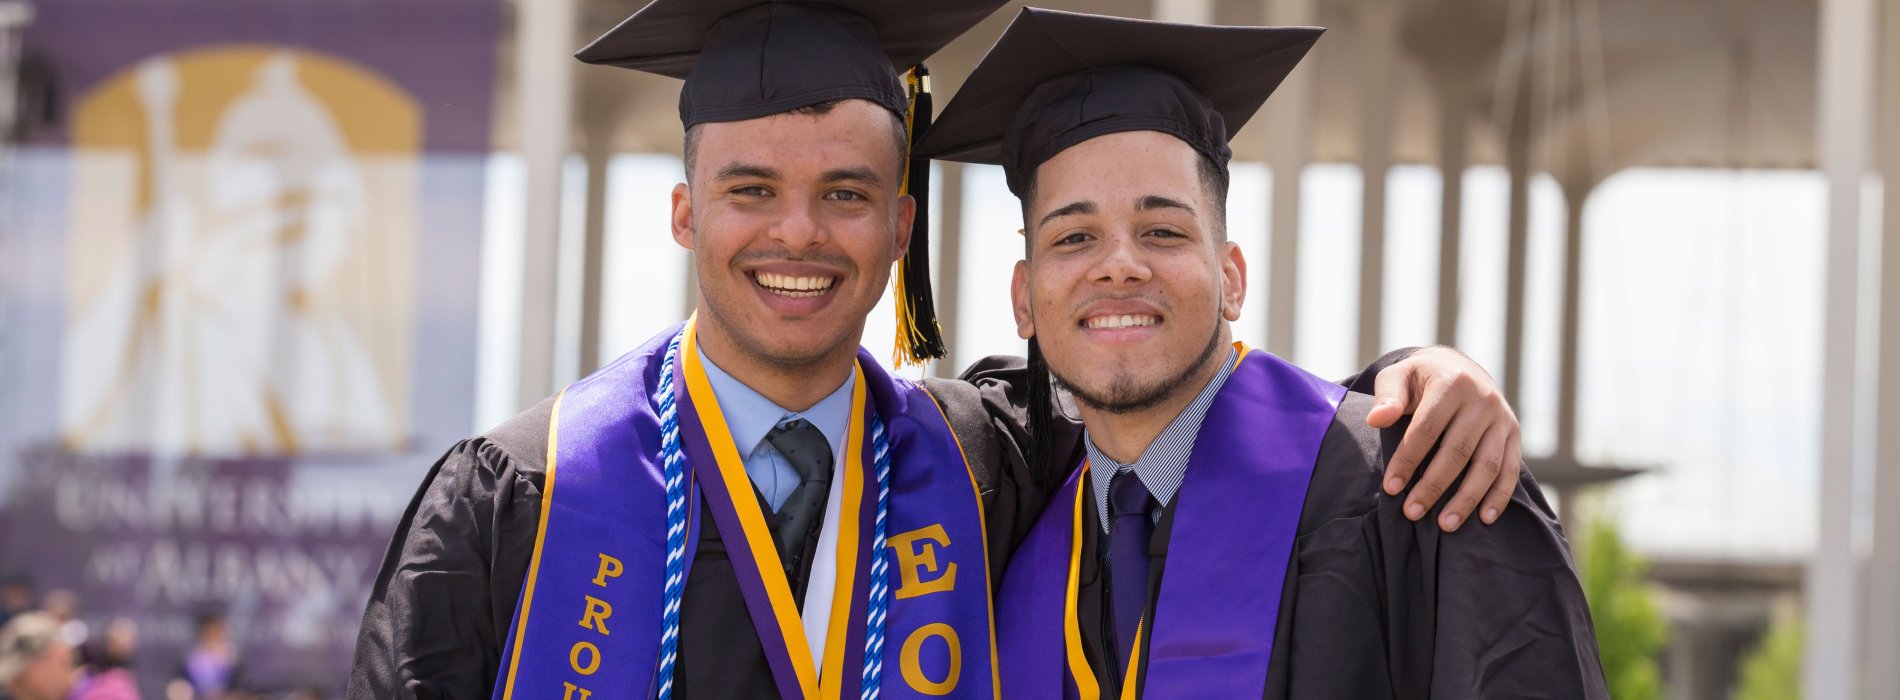 Two students wearing graduation caps, gowns and stoles pose for a photo. One graduate is wearing a Proud to Be EOP stole.